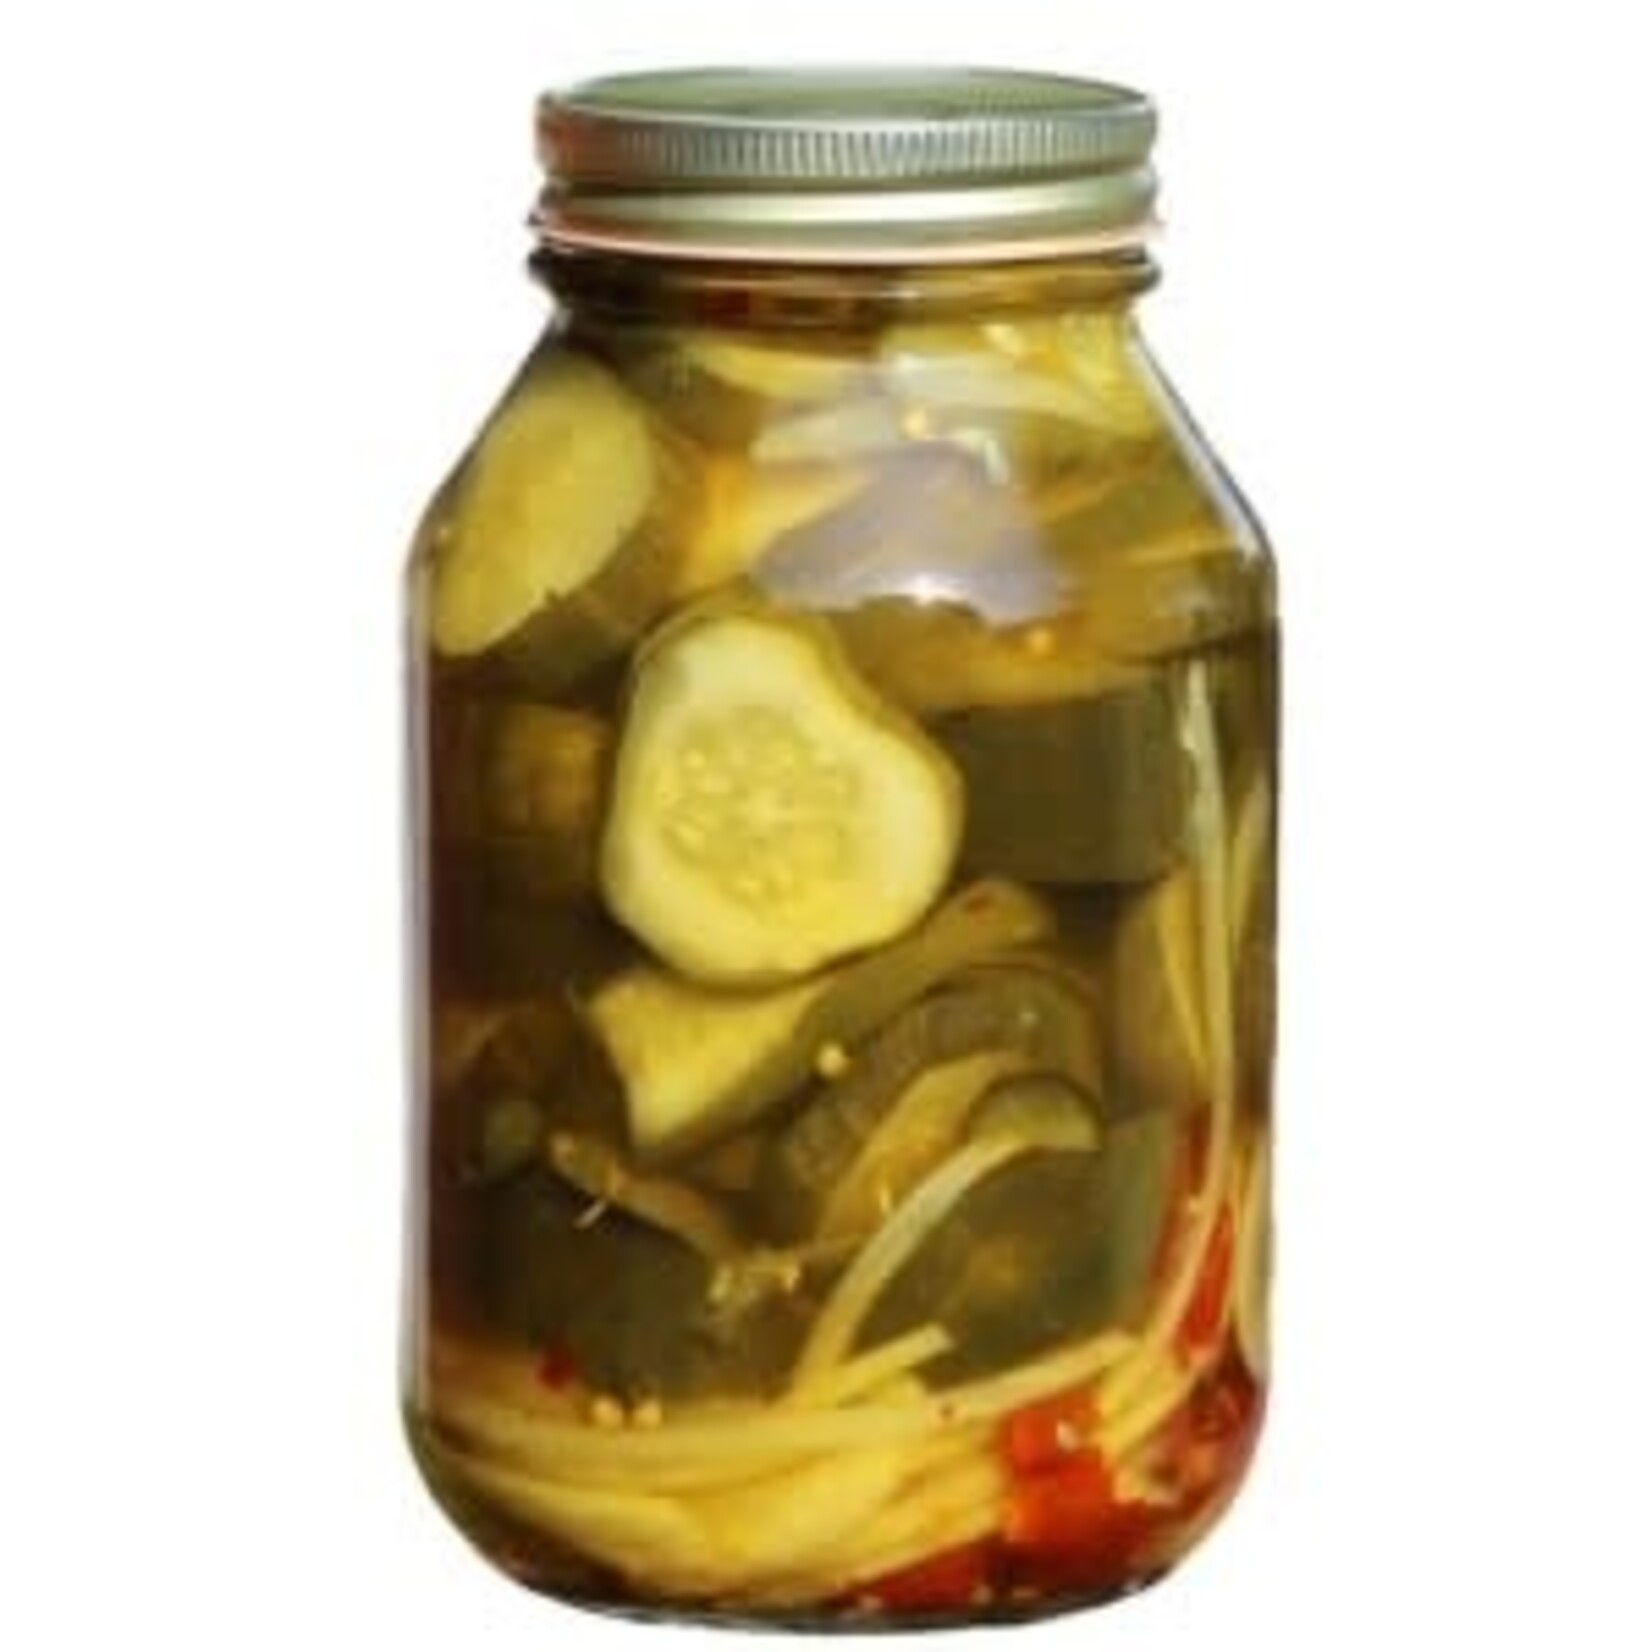 Gourmet Gardens Thick 'n Spicy Bread & Butter Pickles (Quart)